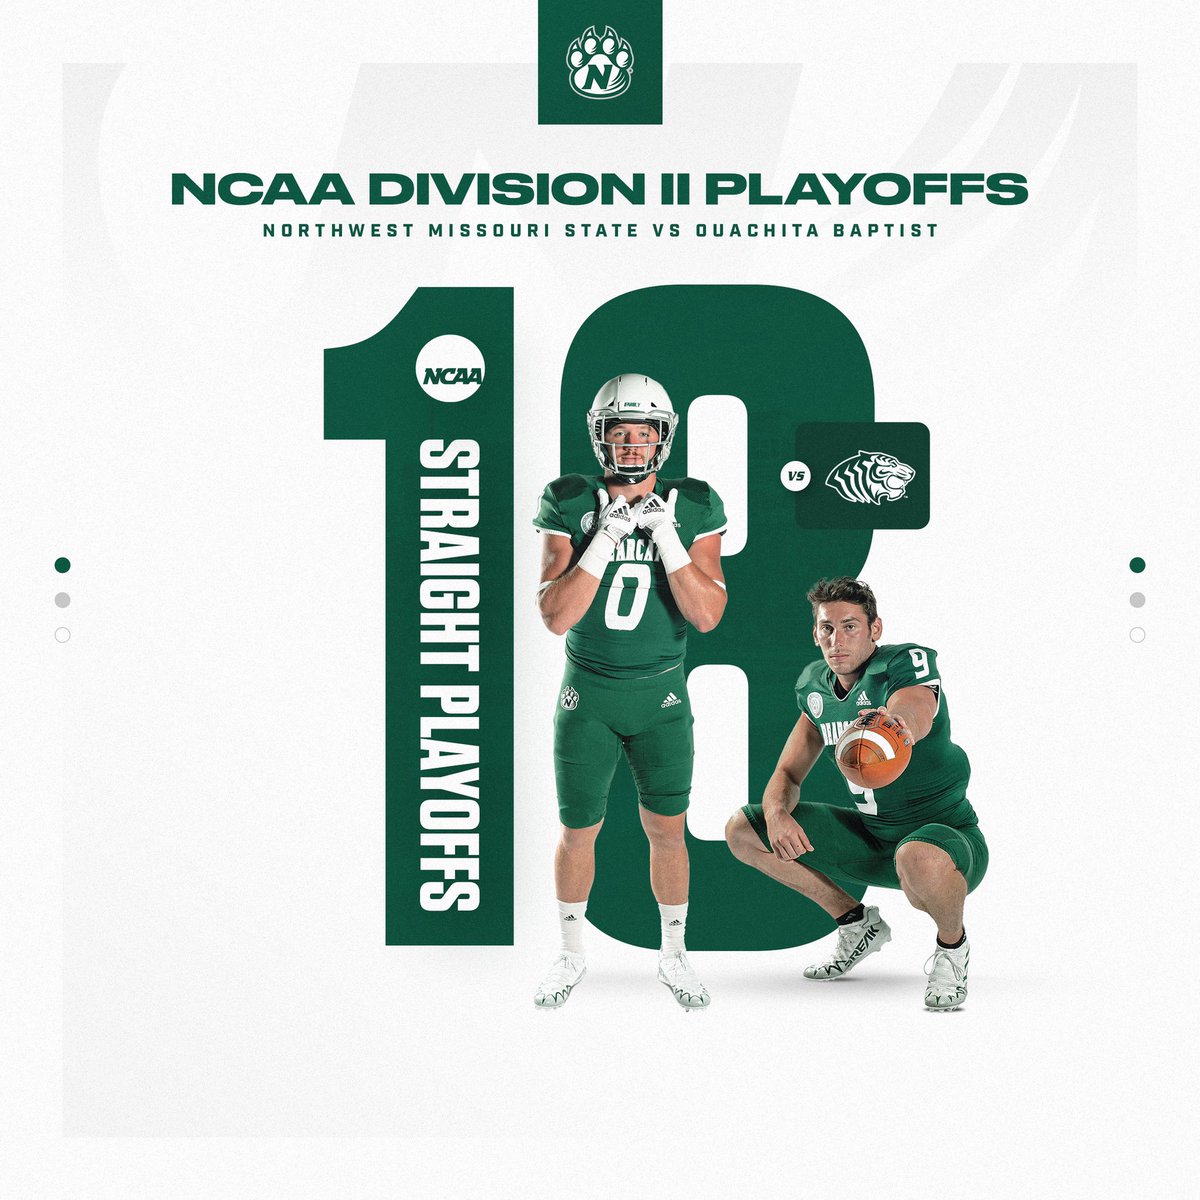 The @NWBearcat_FB team earned the program’s 18th consecutive NCAA Div. II playoff berth. Northwest will take on Ouachita Baptist in the first round. #OABAAB